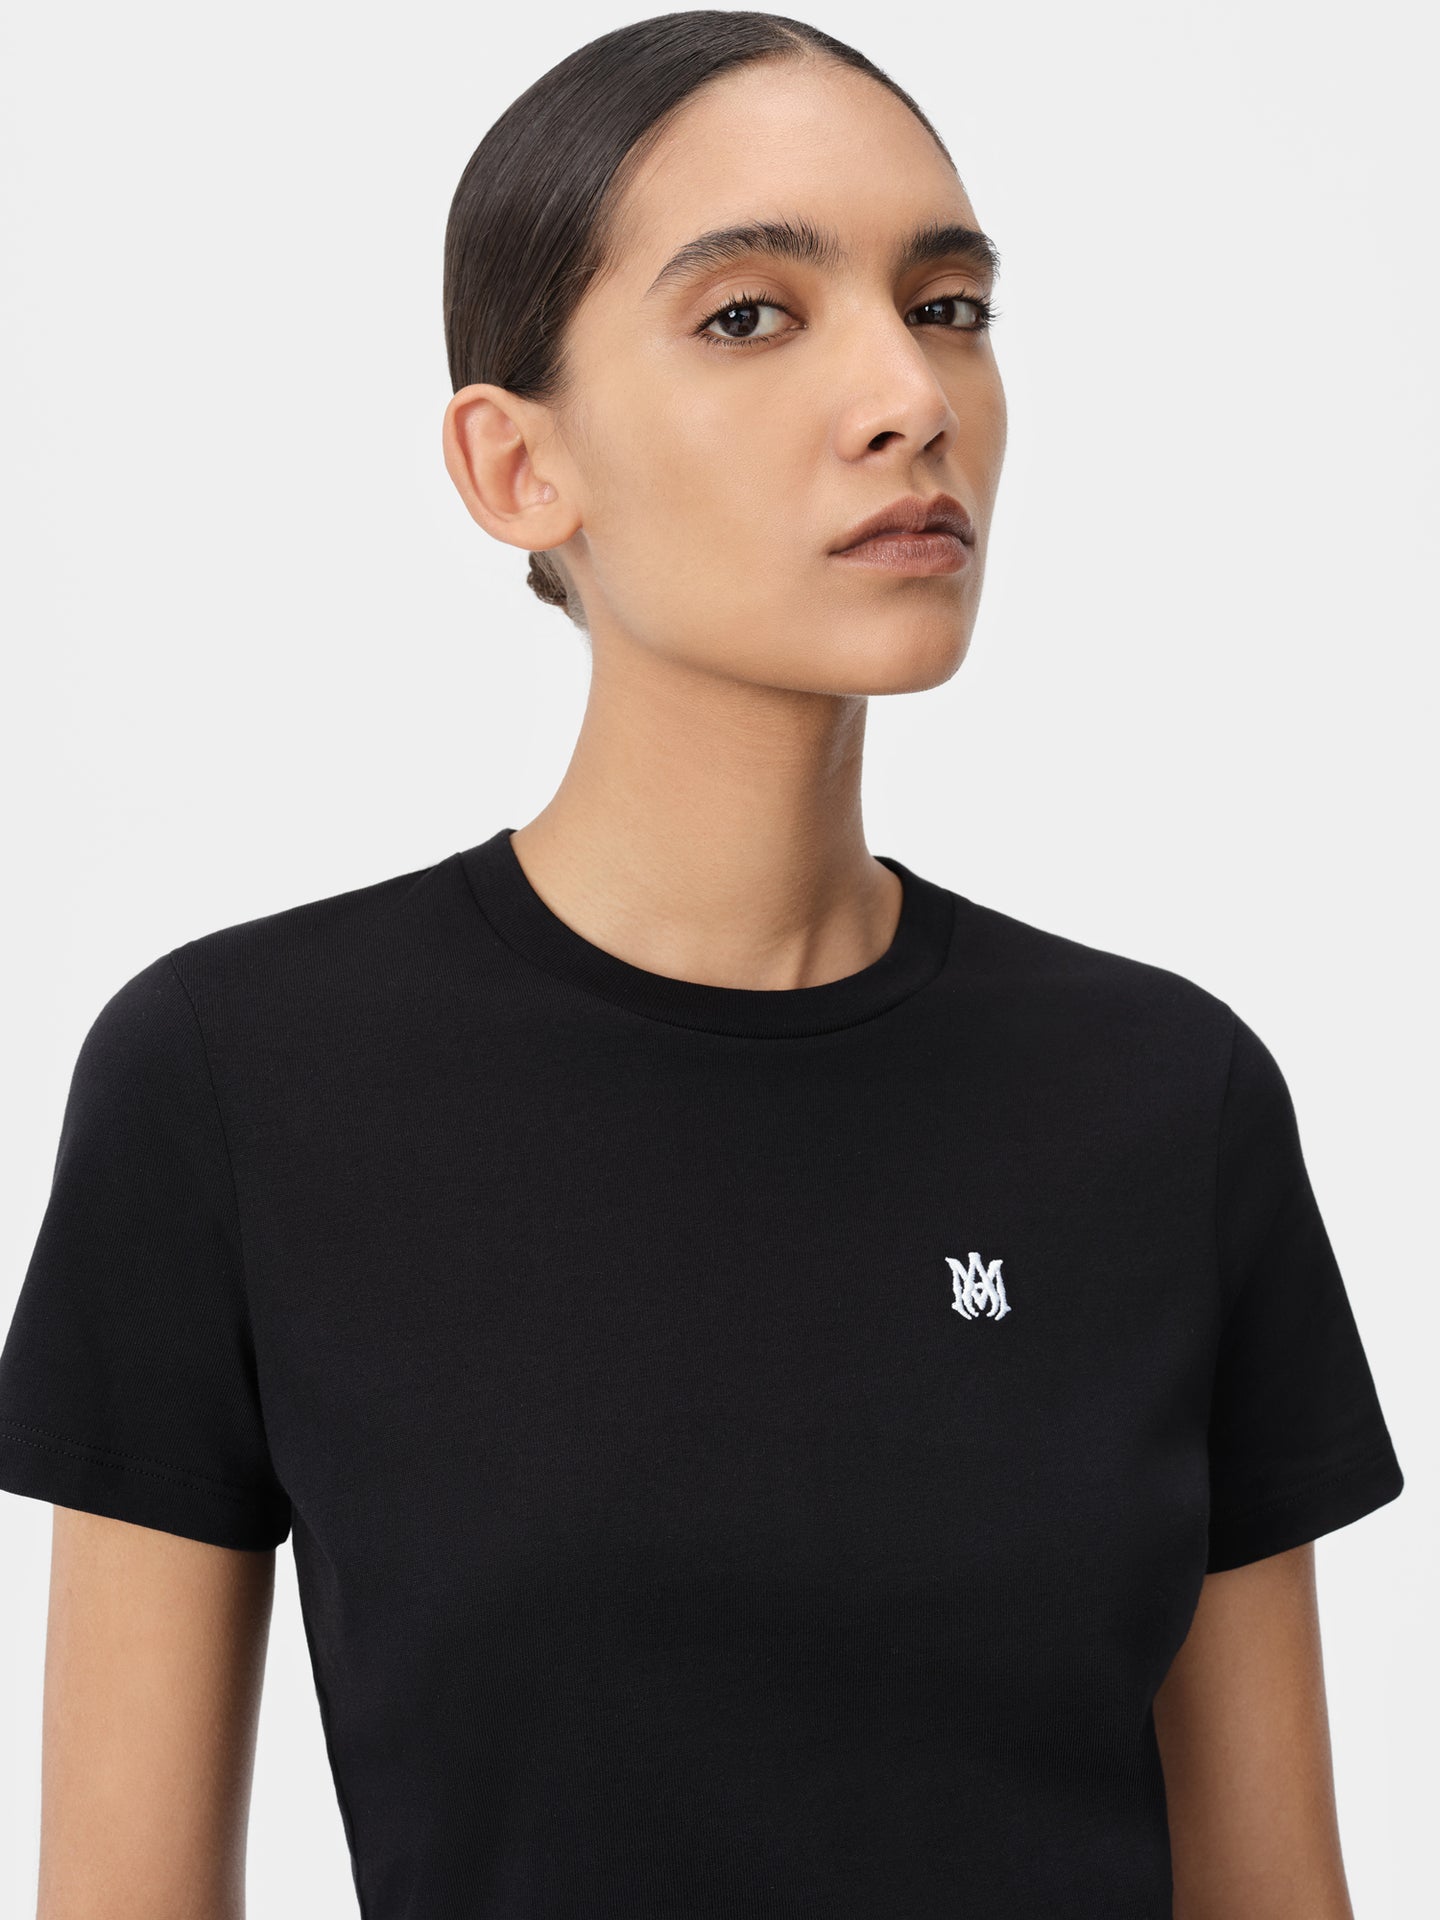 WOMEN - MA EMBROIDERED BABY TEE - Black